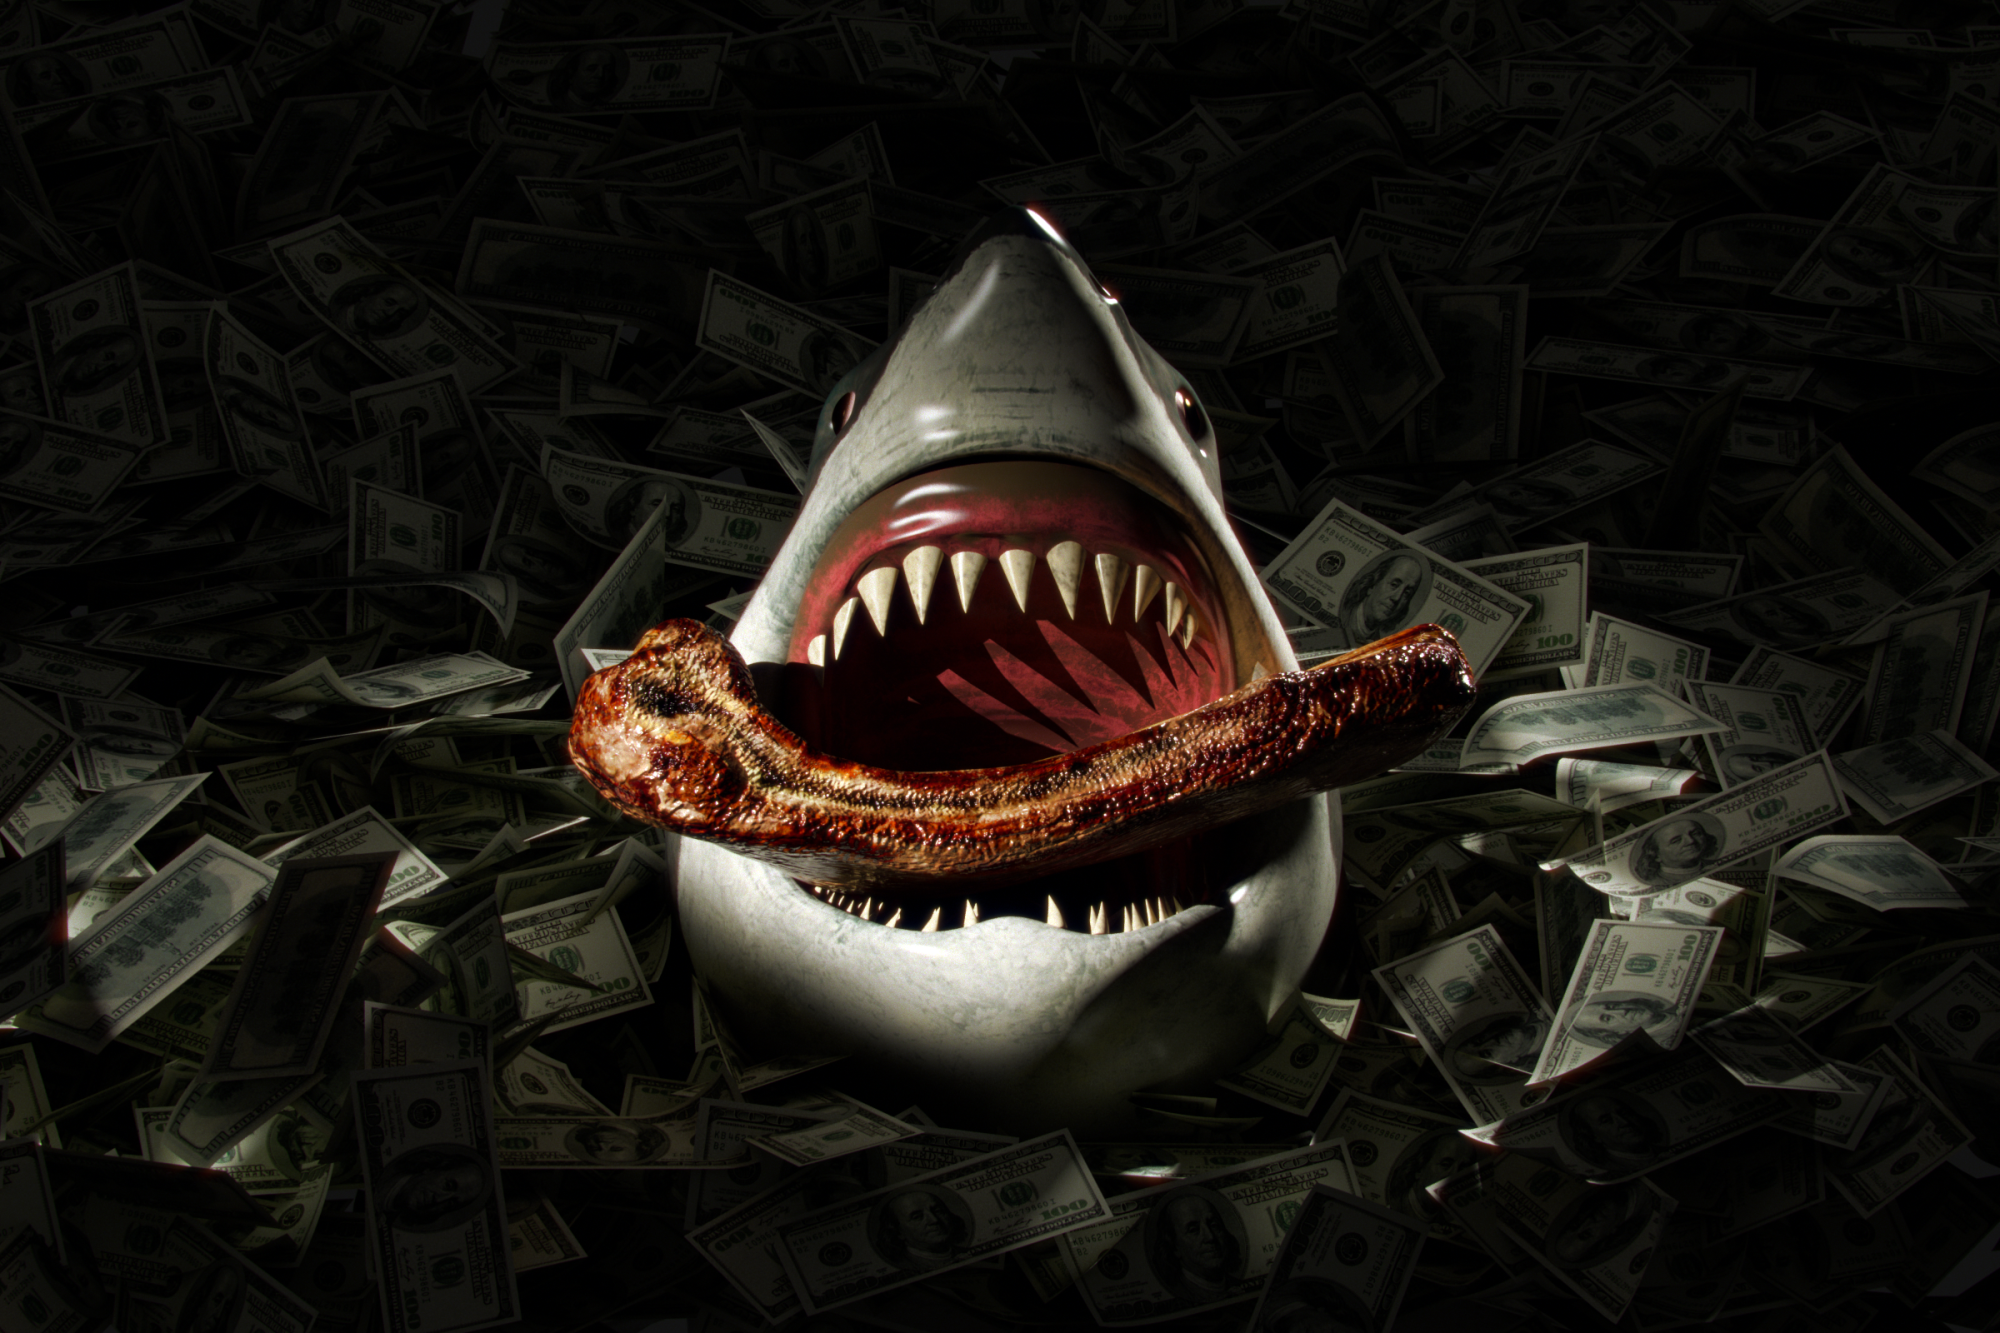 Illustration of a shark eating grilled ribs while surrounded by hundred-dollar bills